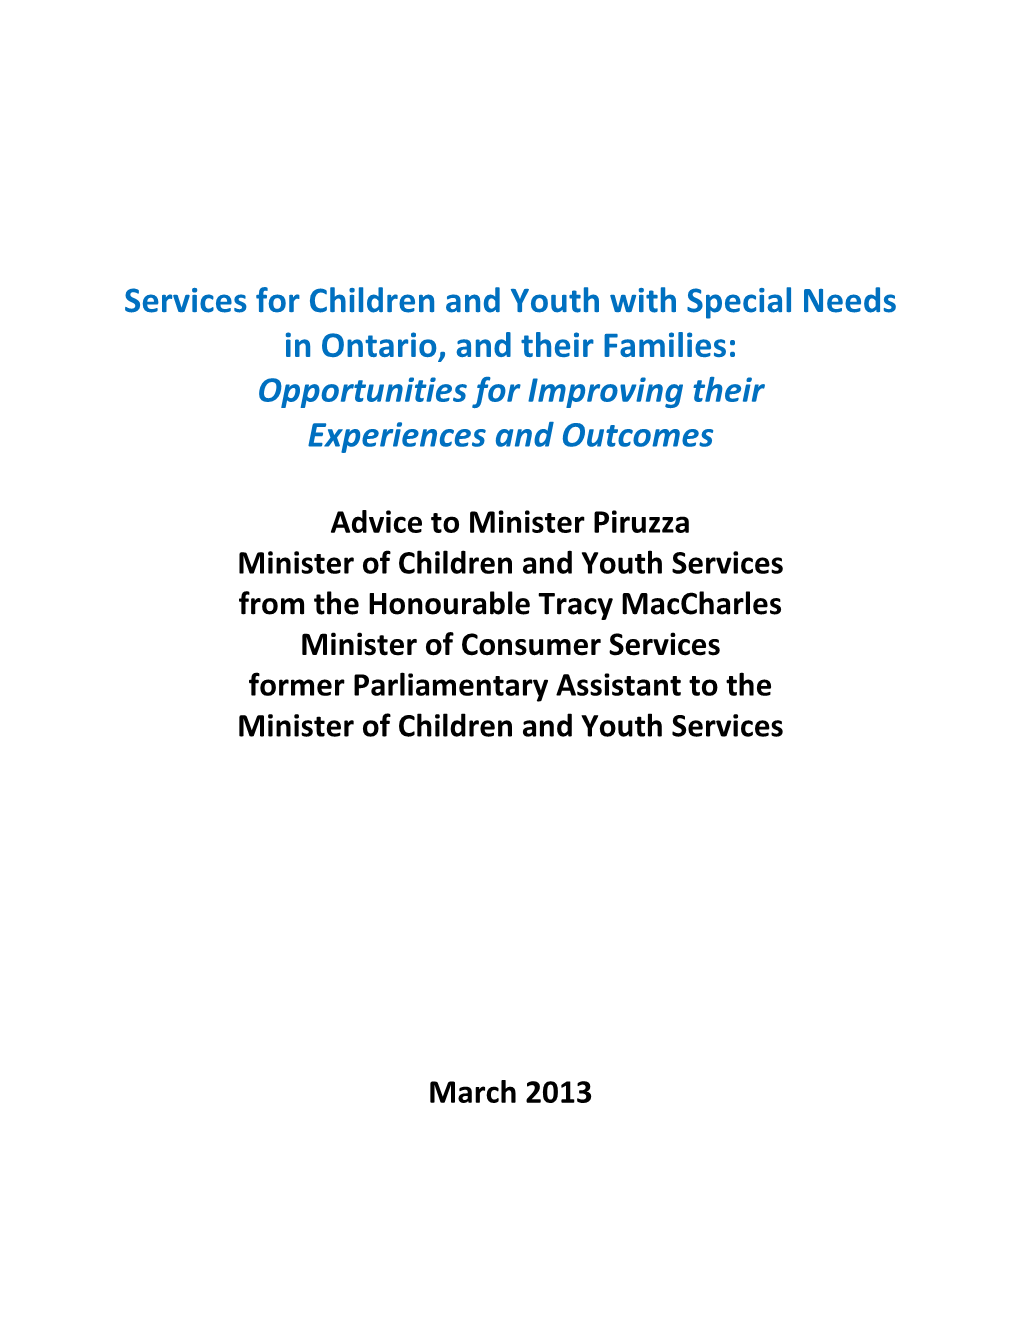 Services for Children and Youth with Special Needs in Ontario, and Their Families: Opportunities for Improving Their Experiences and Outcomes